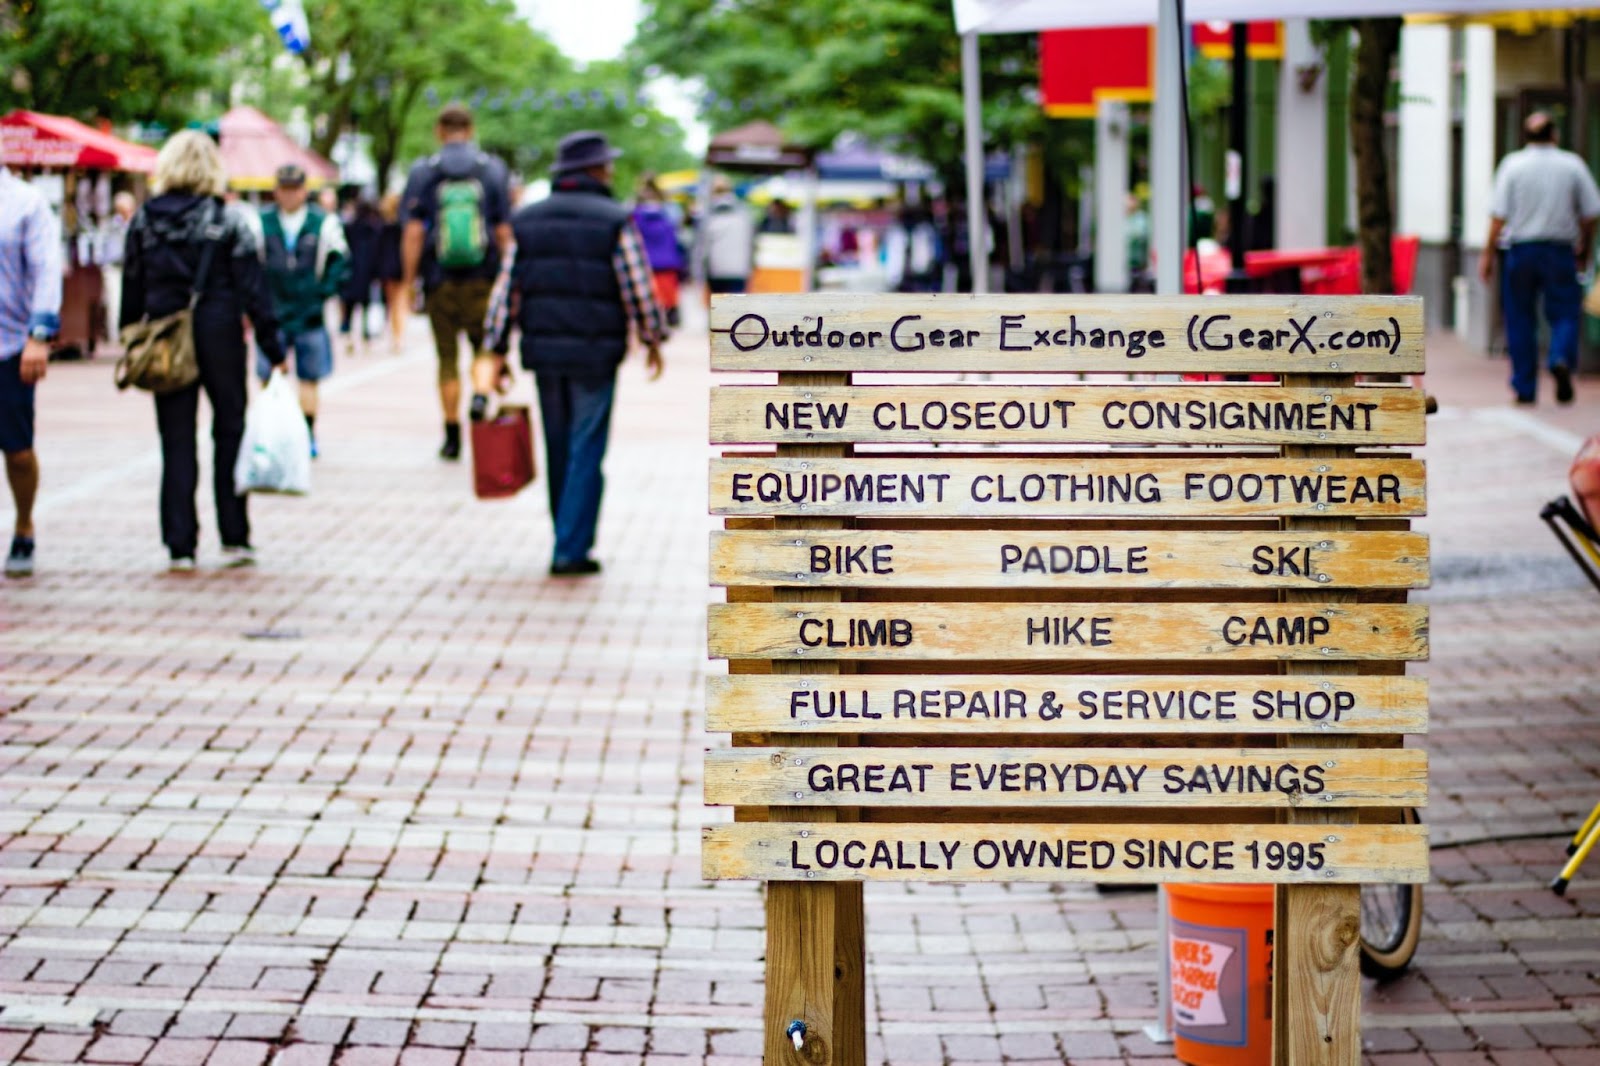 A wooden sign highlighting the Outdoor Gear Exchange shop